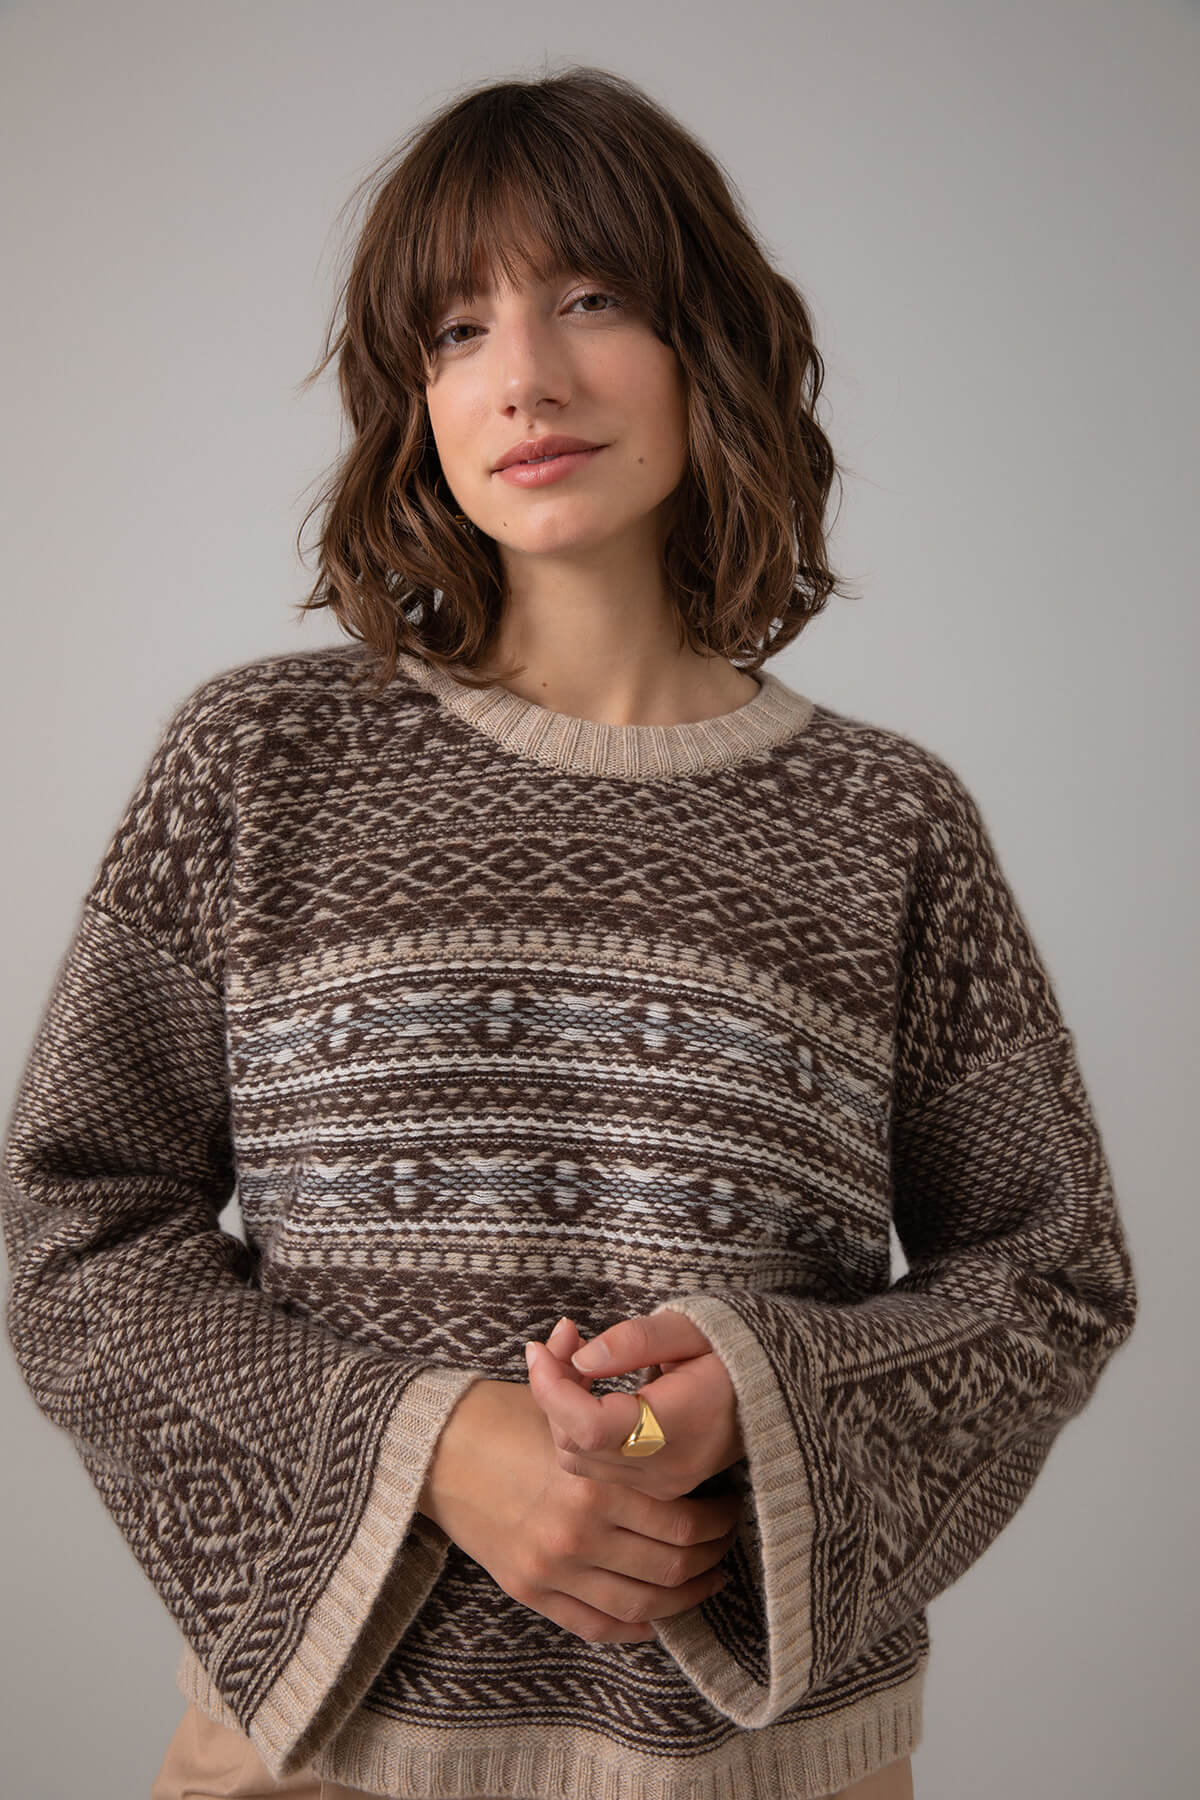 Johnstons of Elgin Women's Round Neck Traditional Sanquhar Fairisle Cashmere Sweater in Oatmeal on a grey background KAC05099Q23724